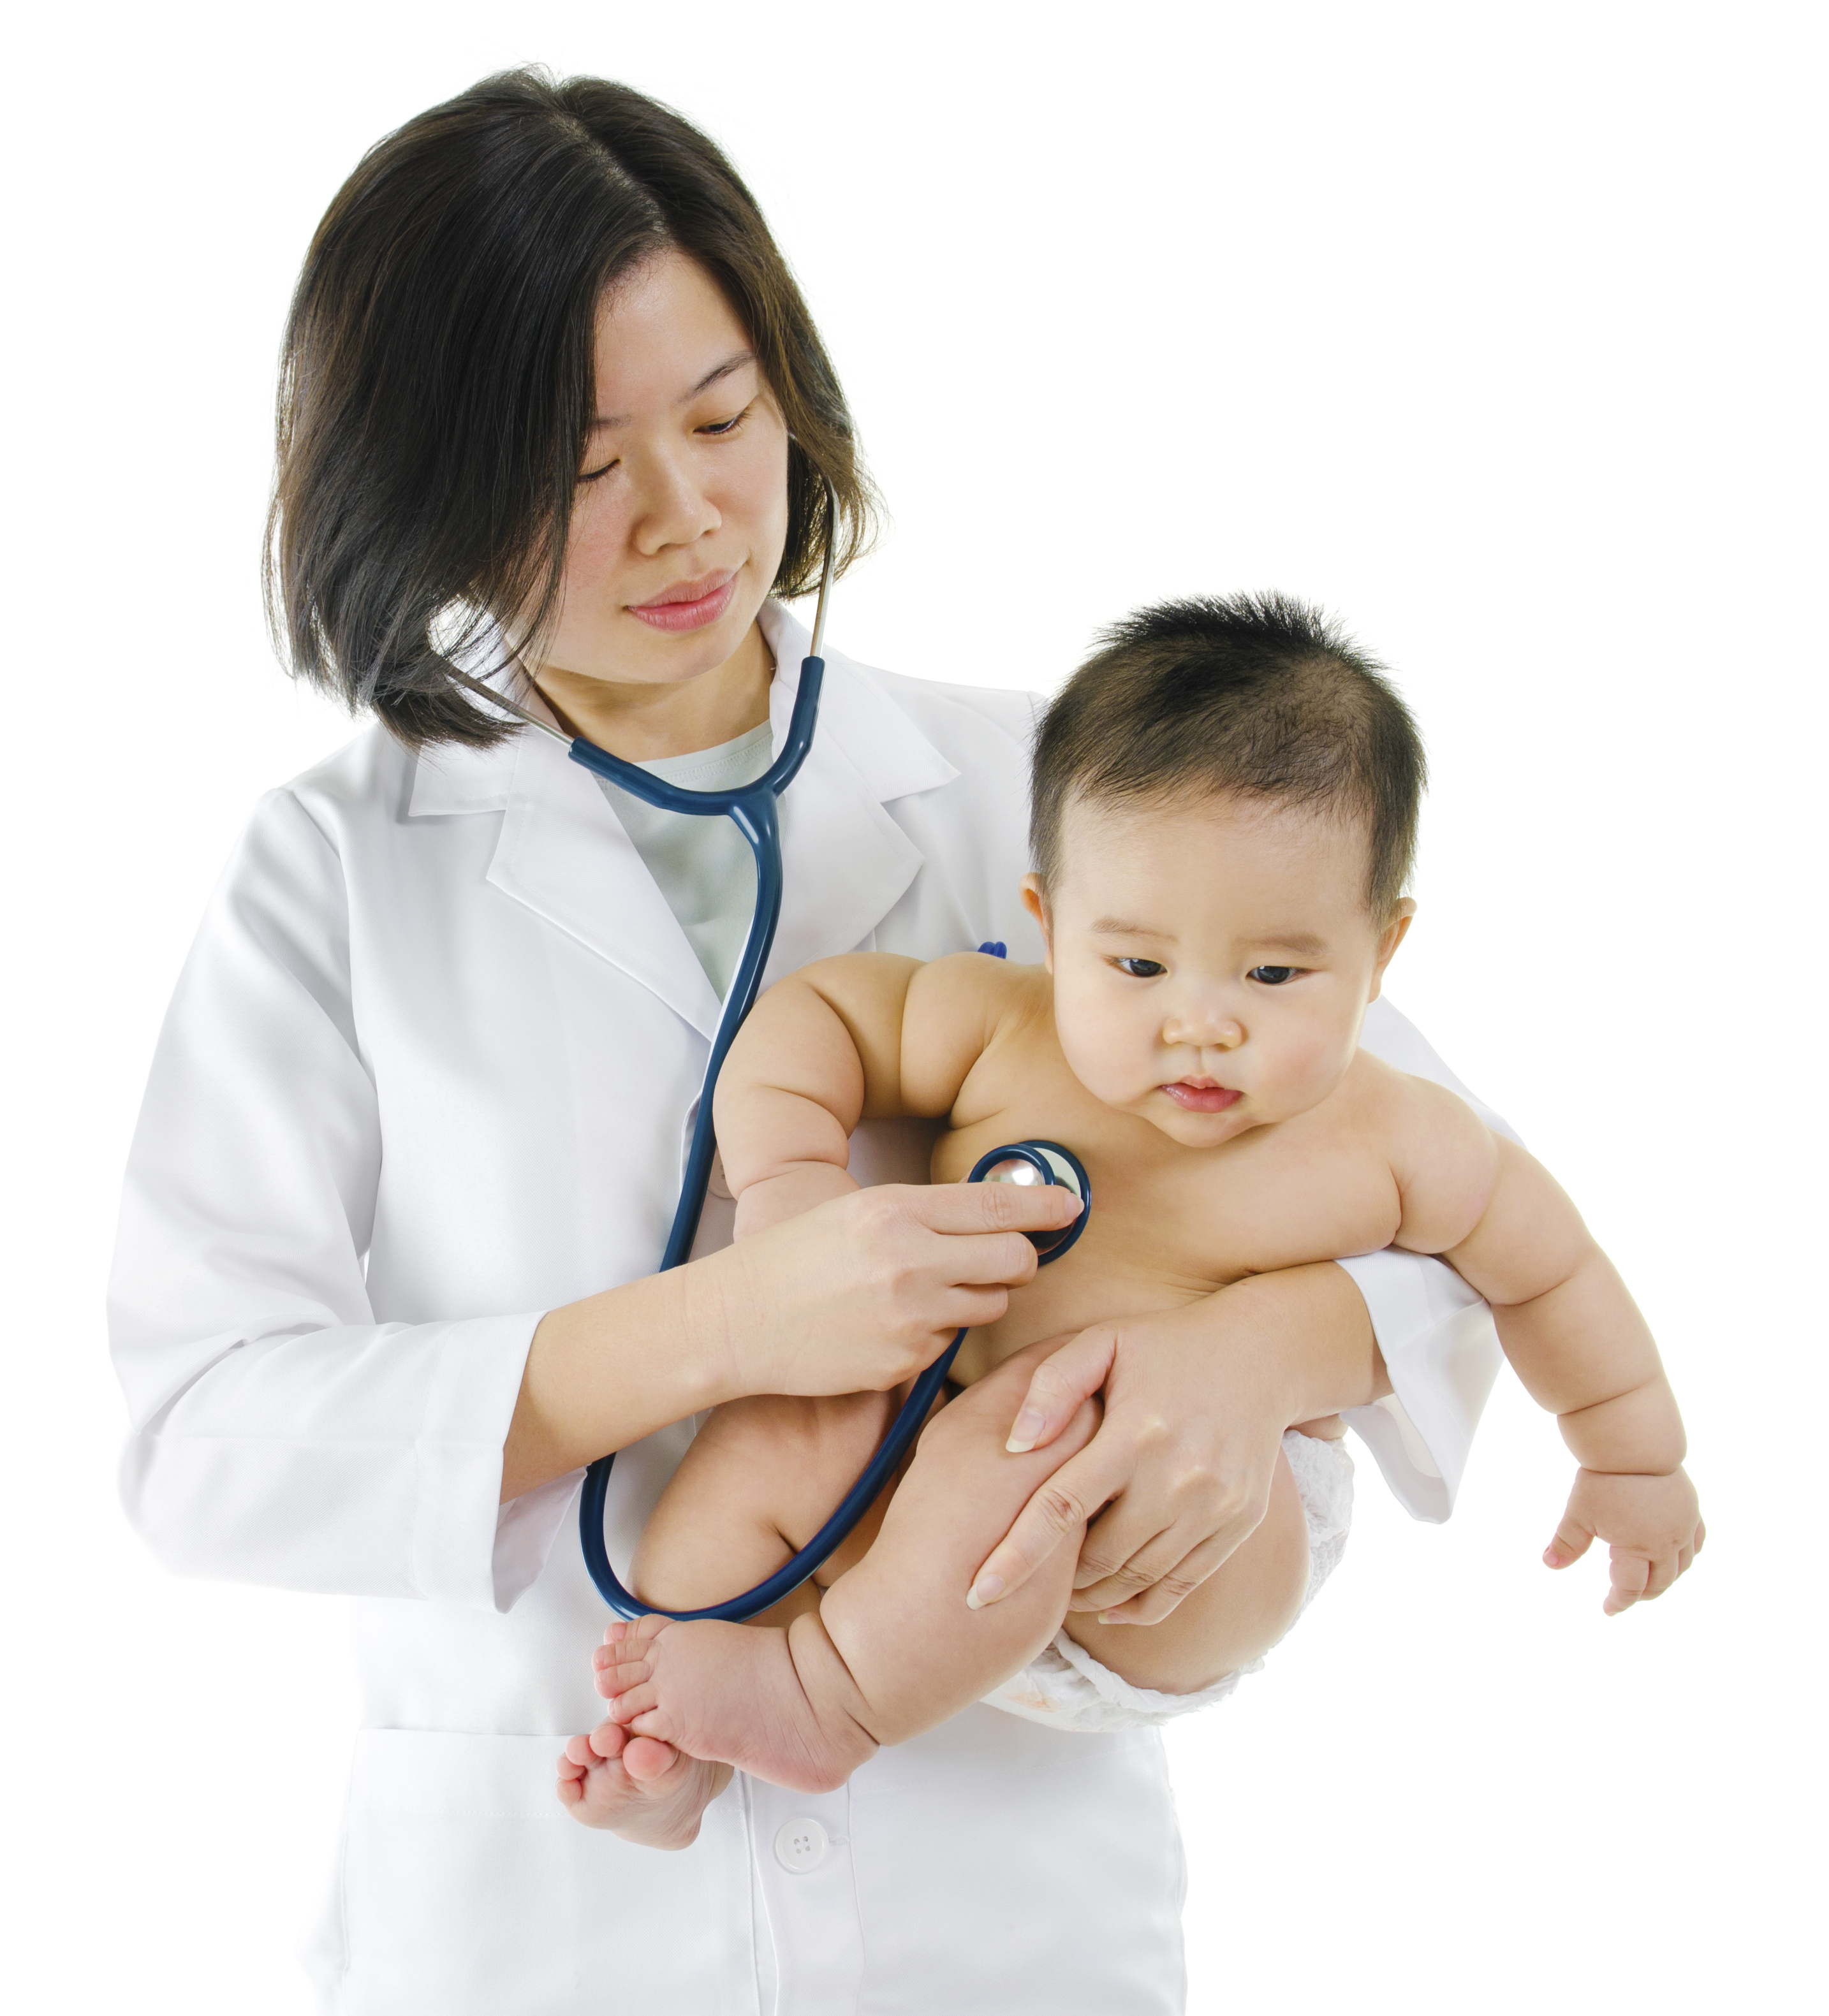 Doctor examining and holding baby